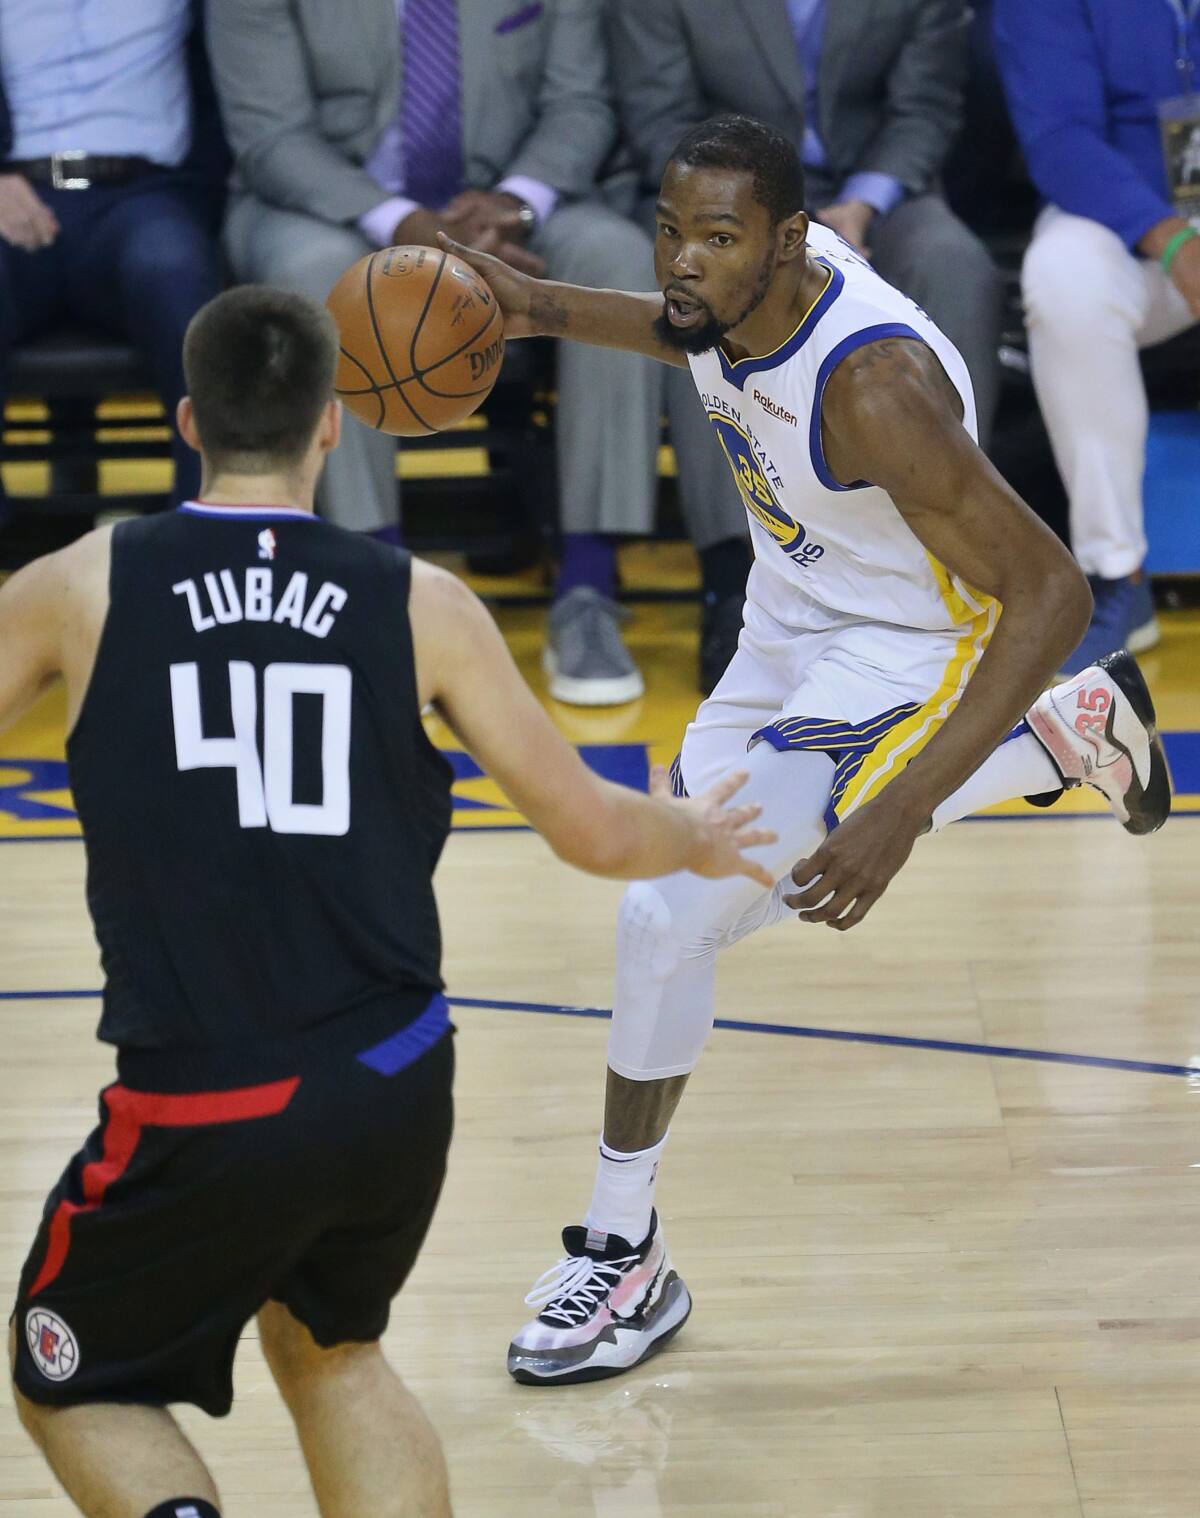 Barber: Steph Curry on fire as Warriors bury Clippers 121-104